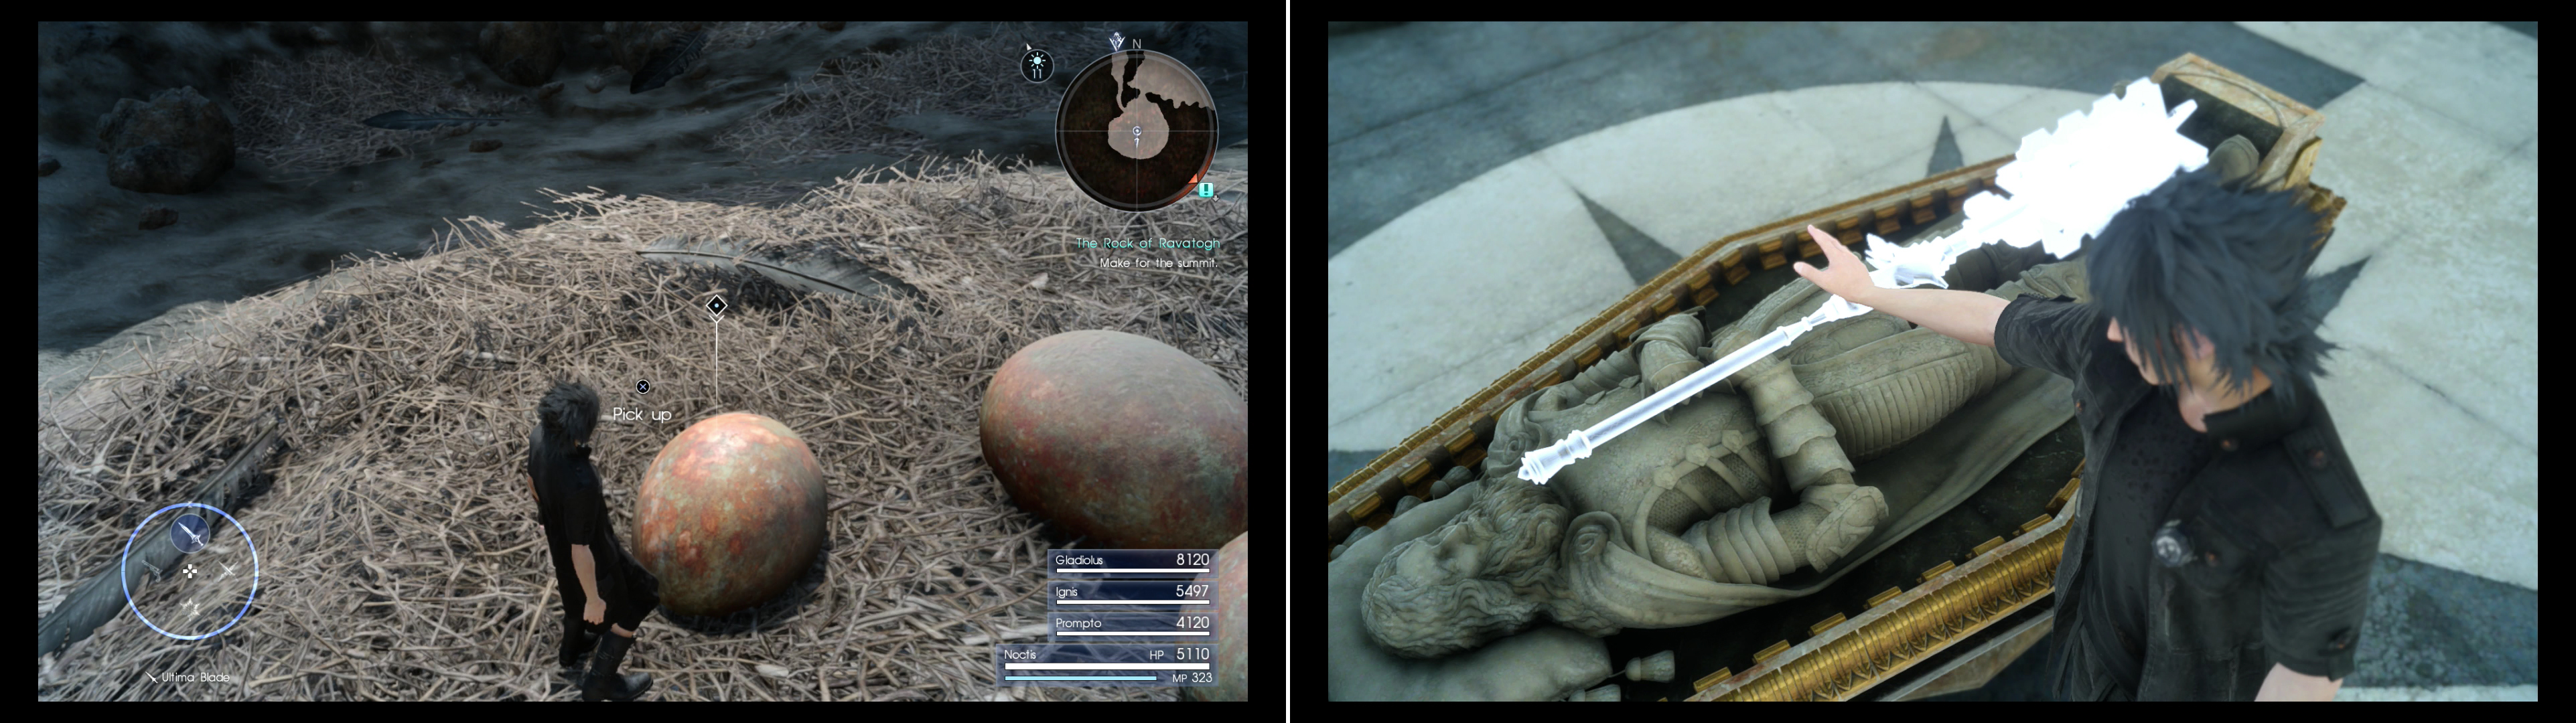 If you picked the “egg” variant of “The Perfect Cup” you’ll find a Zu Egg you can plunder (left). Beyond the Zu’s nest you’ll find the Tomb of the Fierce, where you can obtain the Mace of the Fierce (right).